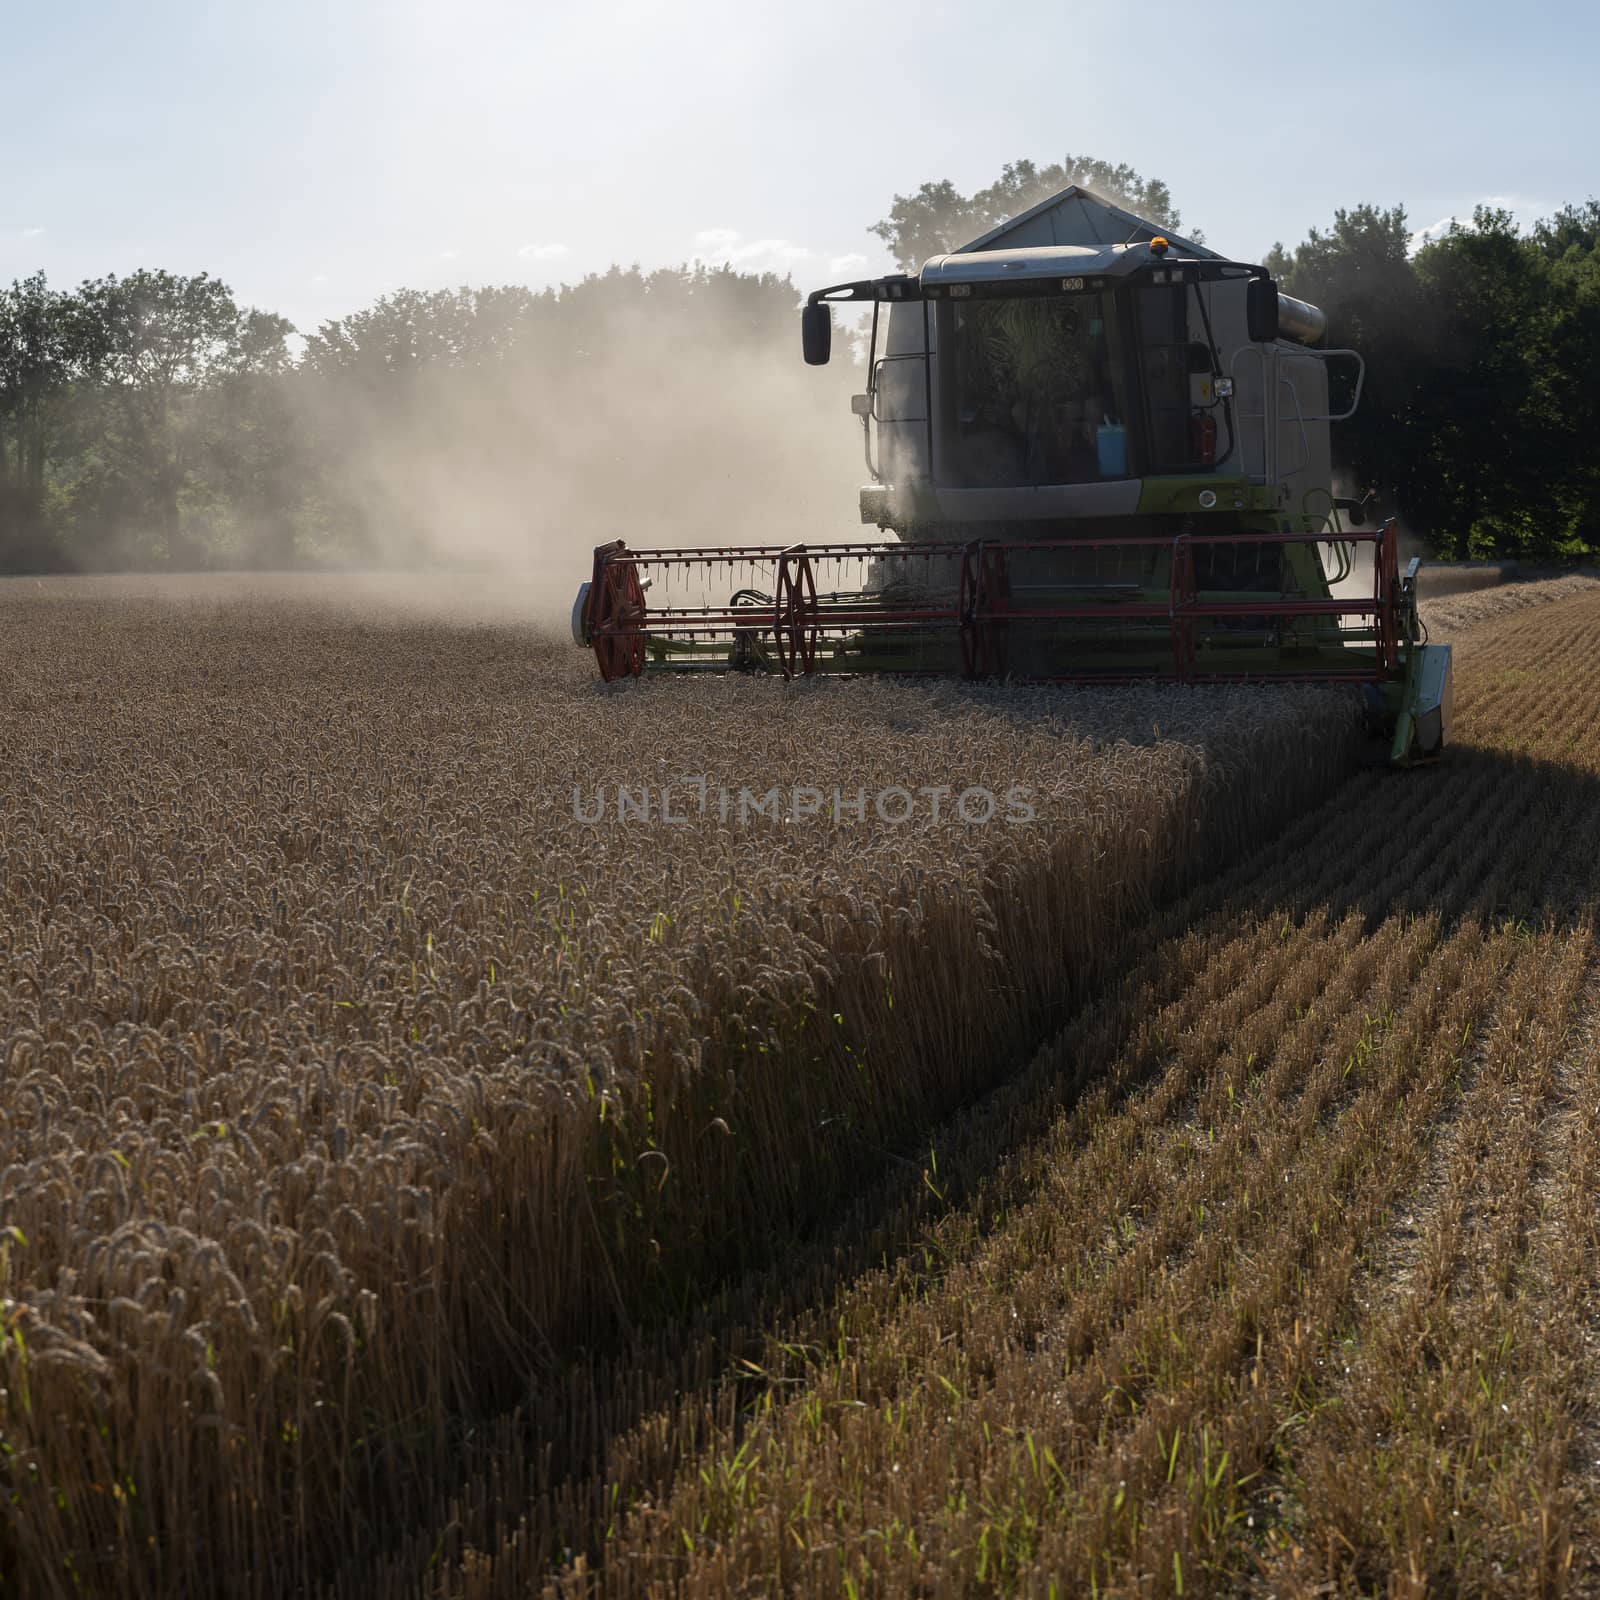 combine working on grain field during harvest in the north of france